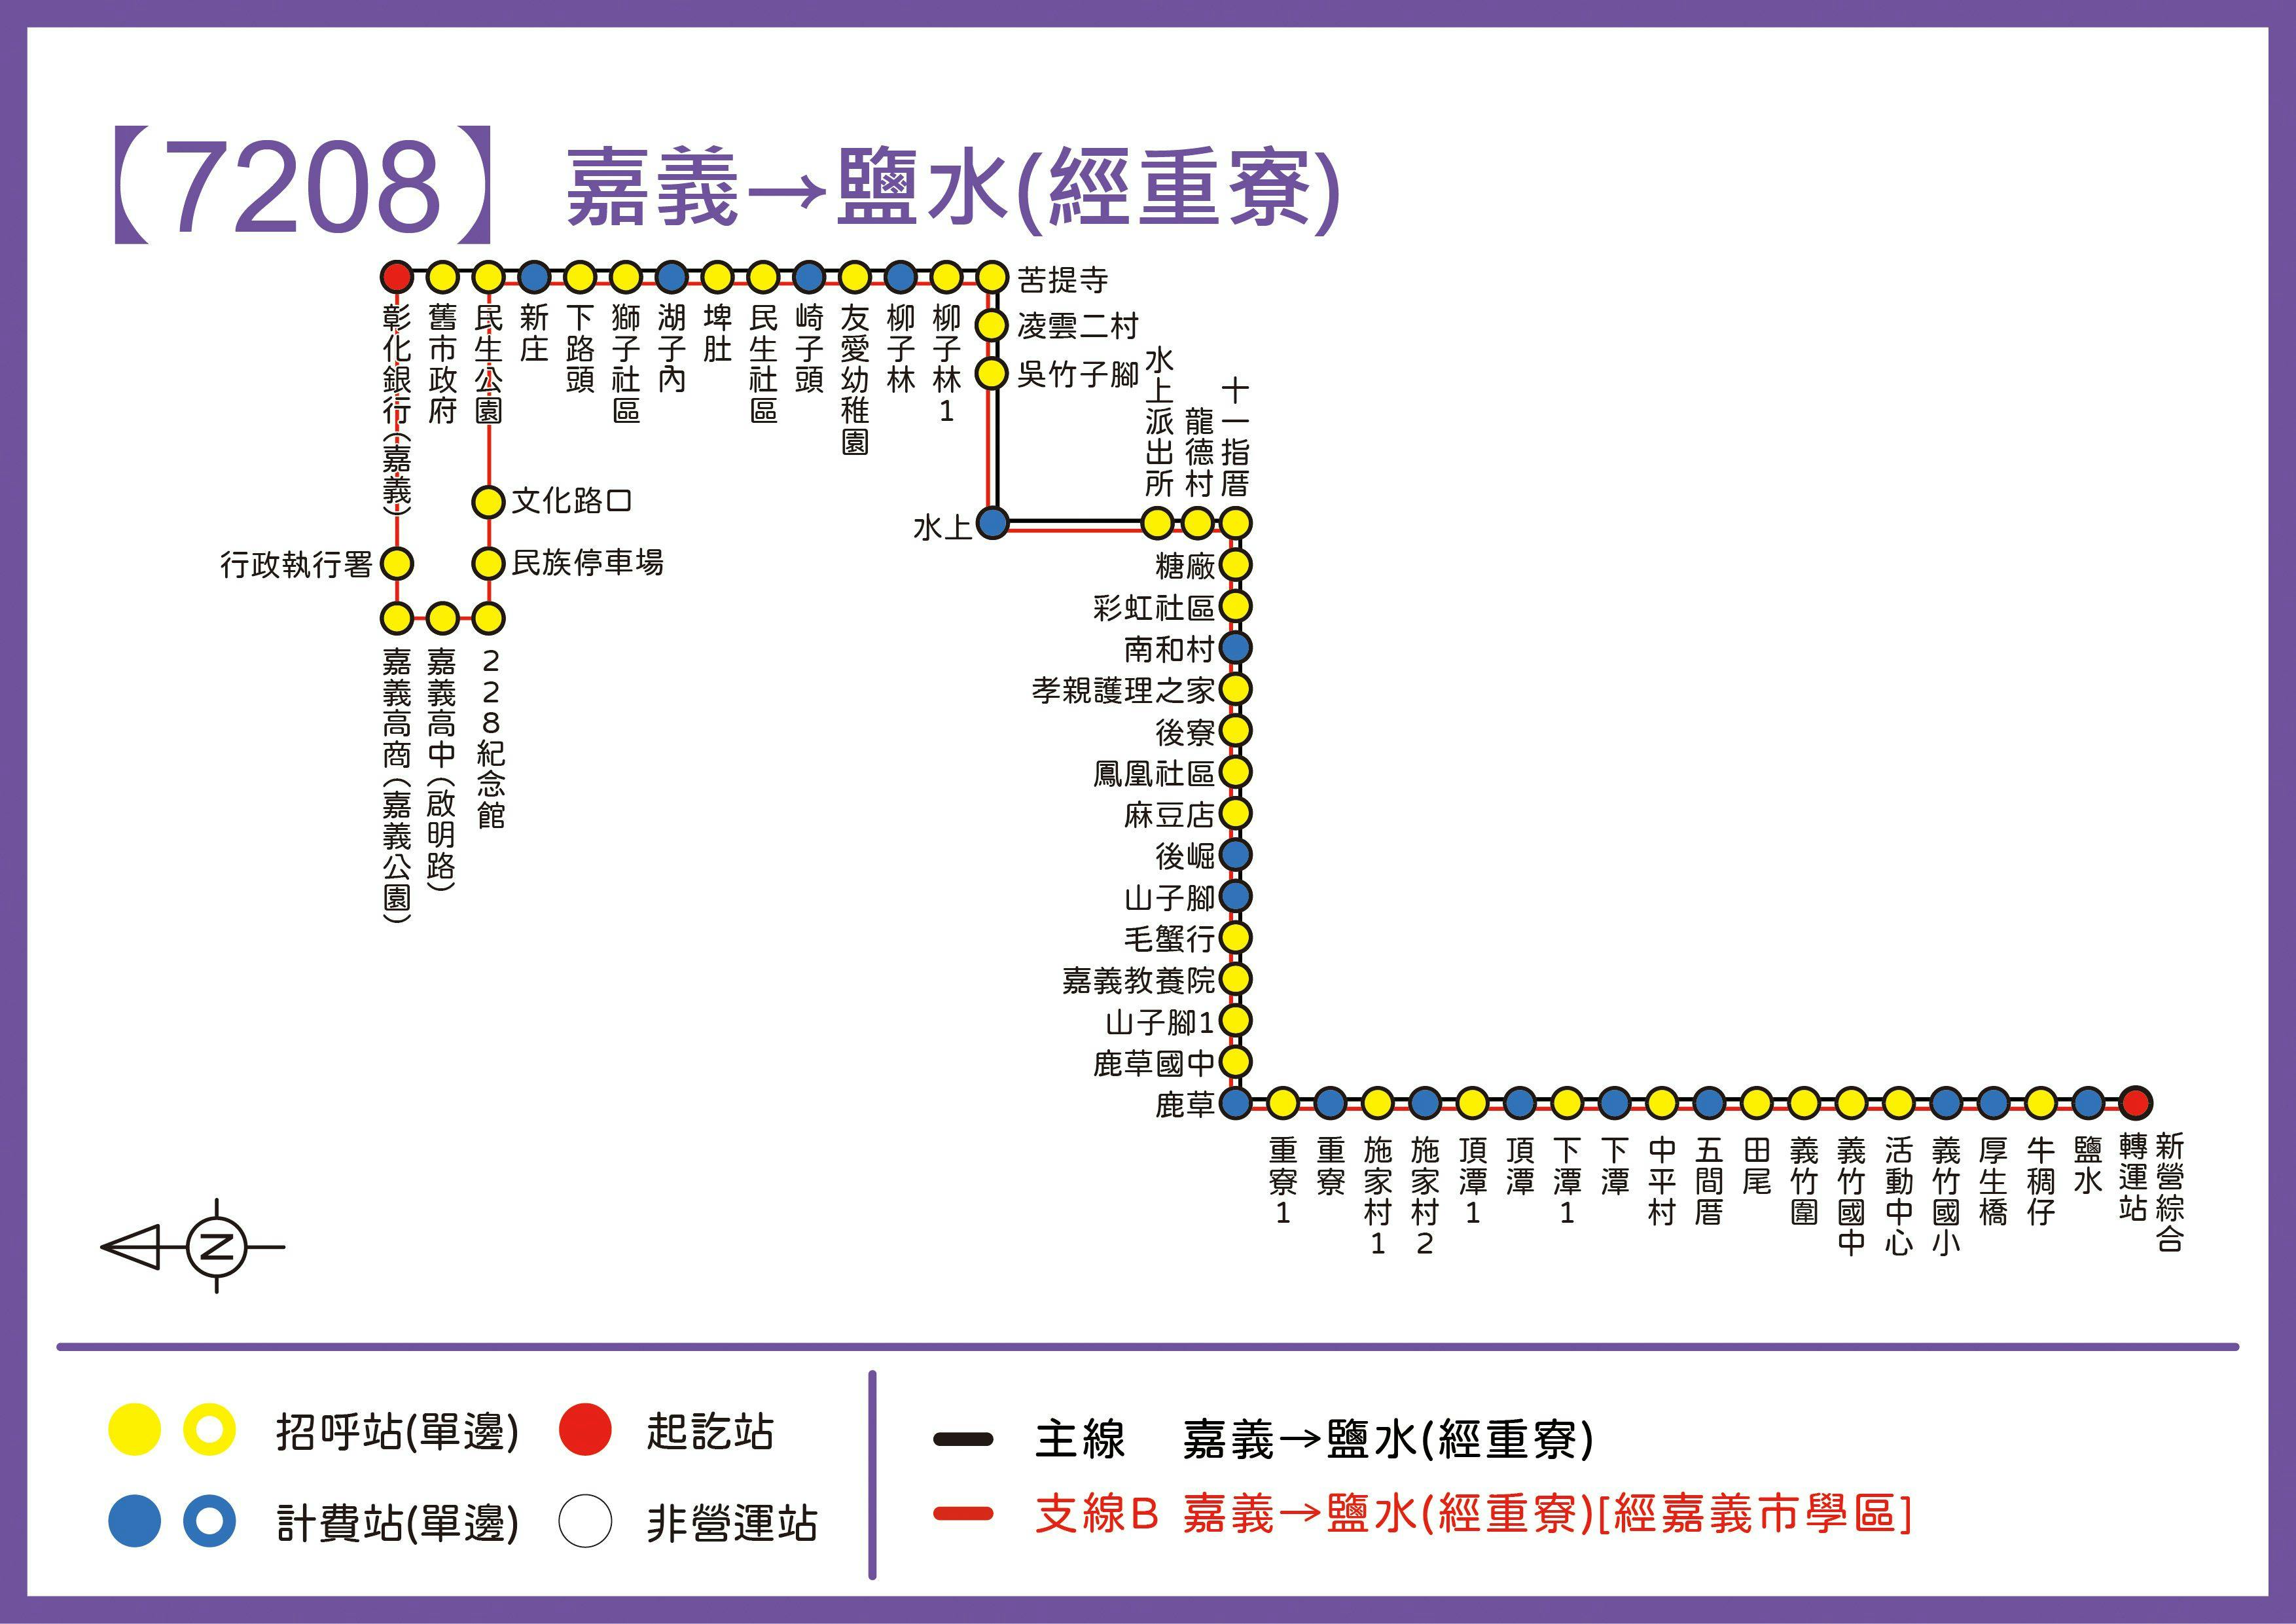 7208Route Map-Chiayi Bus